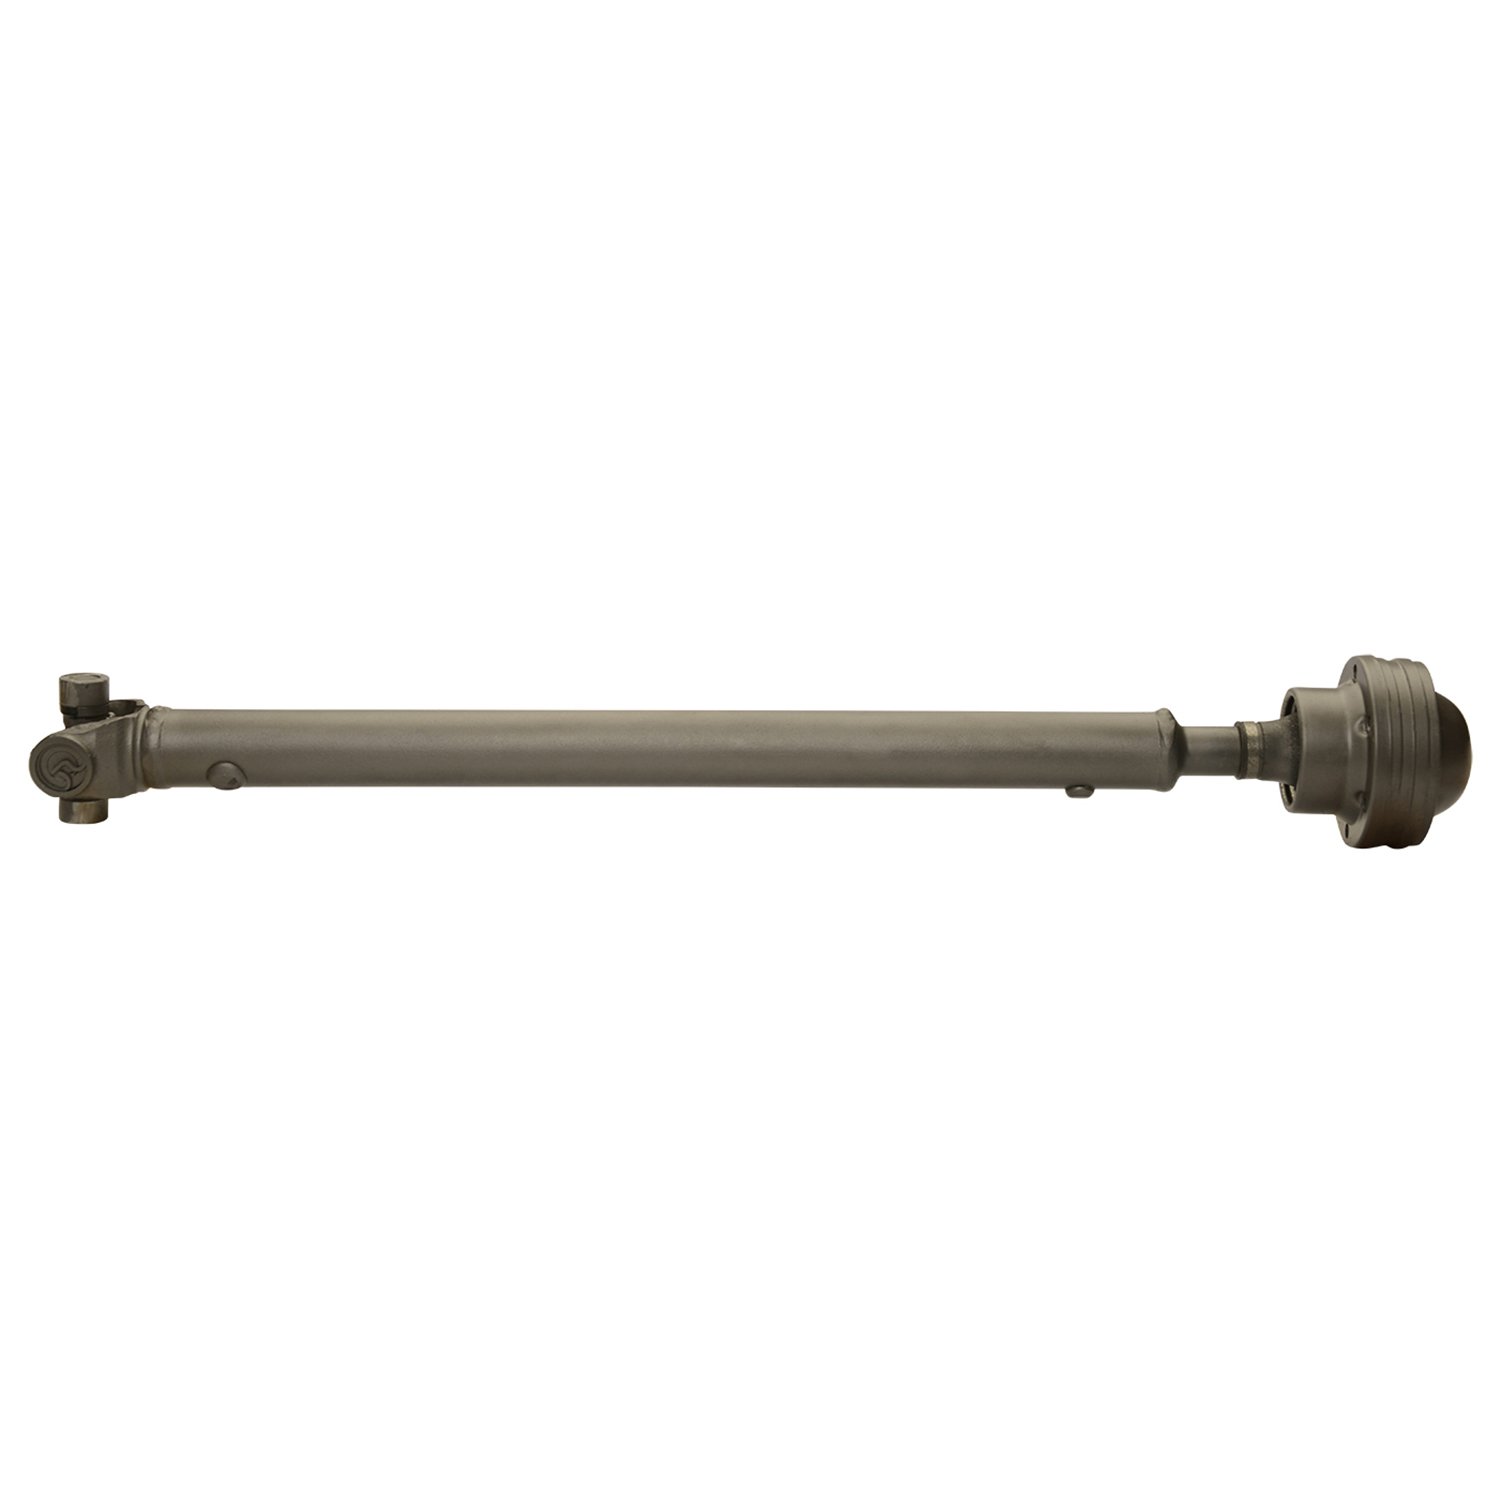 USA Standard ZDS9450 Front Driveshaft, For Explorer & Mountaineer, 23 in. Weld-To-Weld